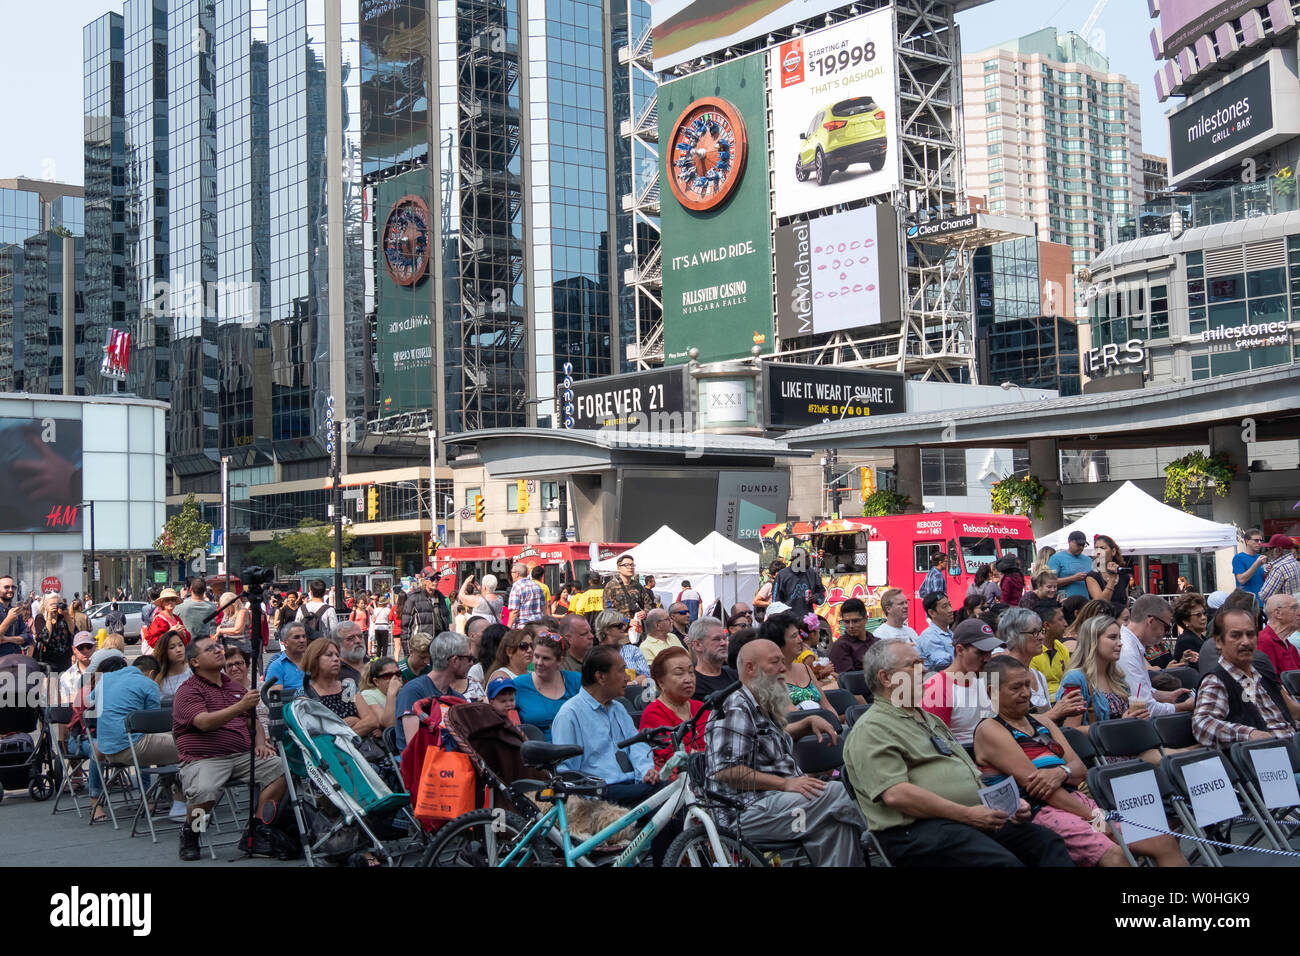 Toronto,Ontario.Canada, city, downtown, summer festival on Dundas Square and Yonge Street Stock Photo